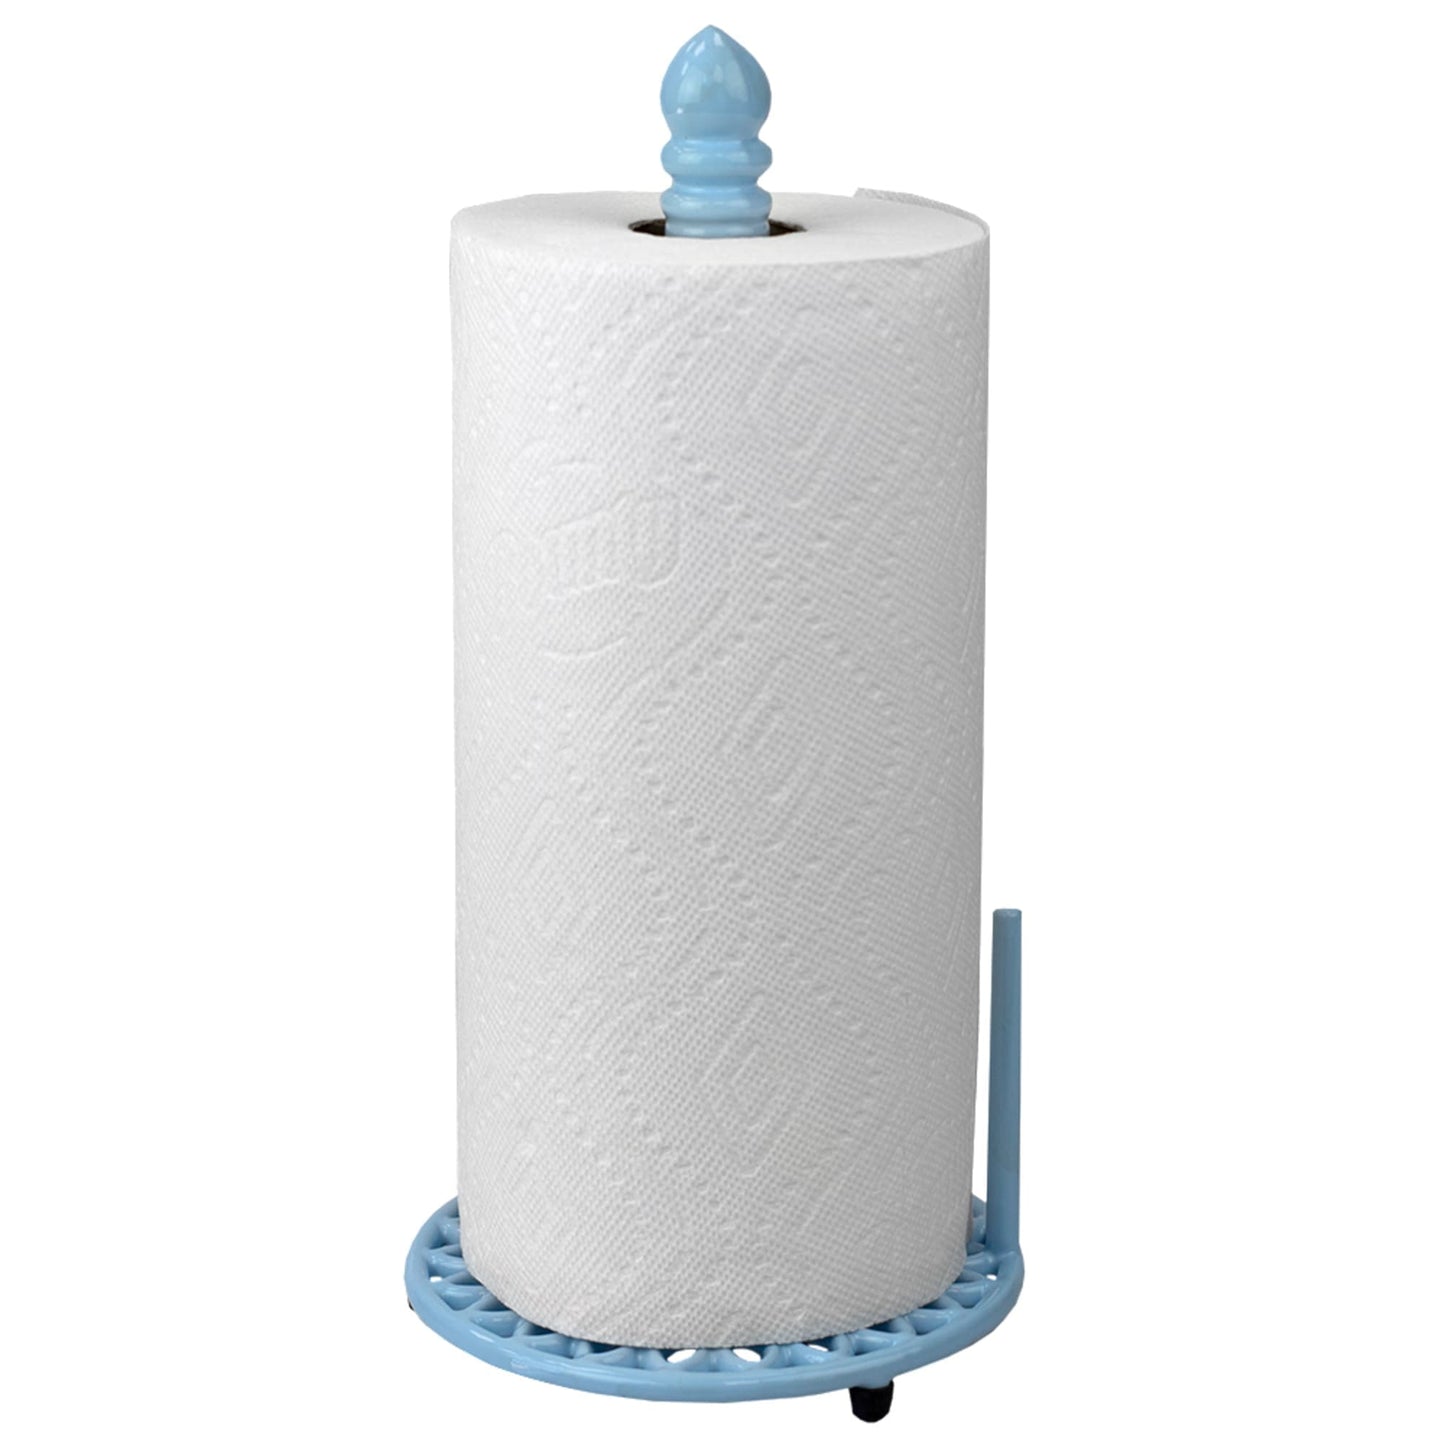 Sunflower Free-Standing Cast Iron Paper Towel Holder with Dispensing Side Bar, Blue